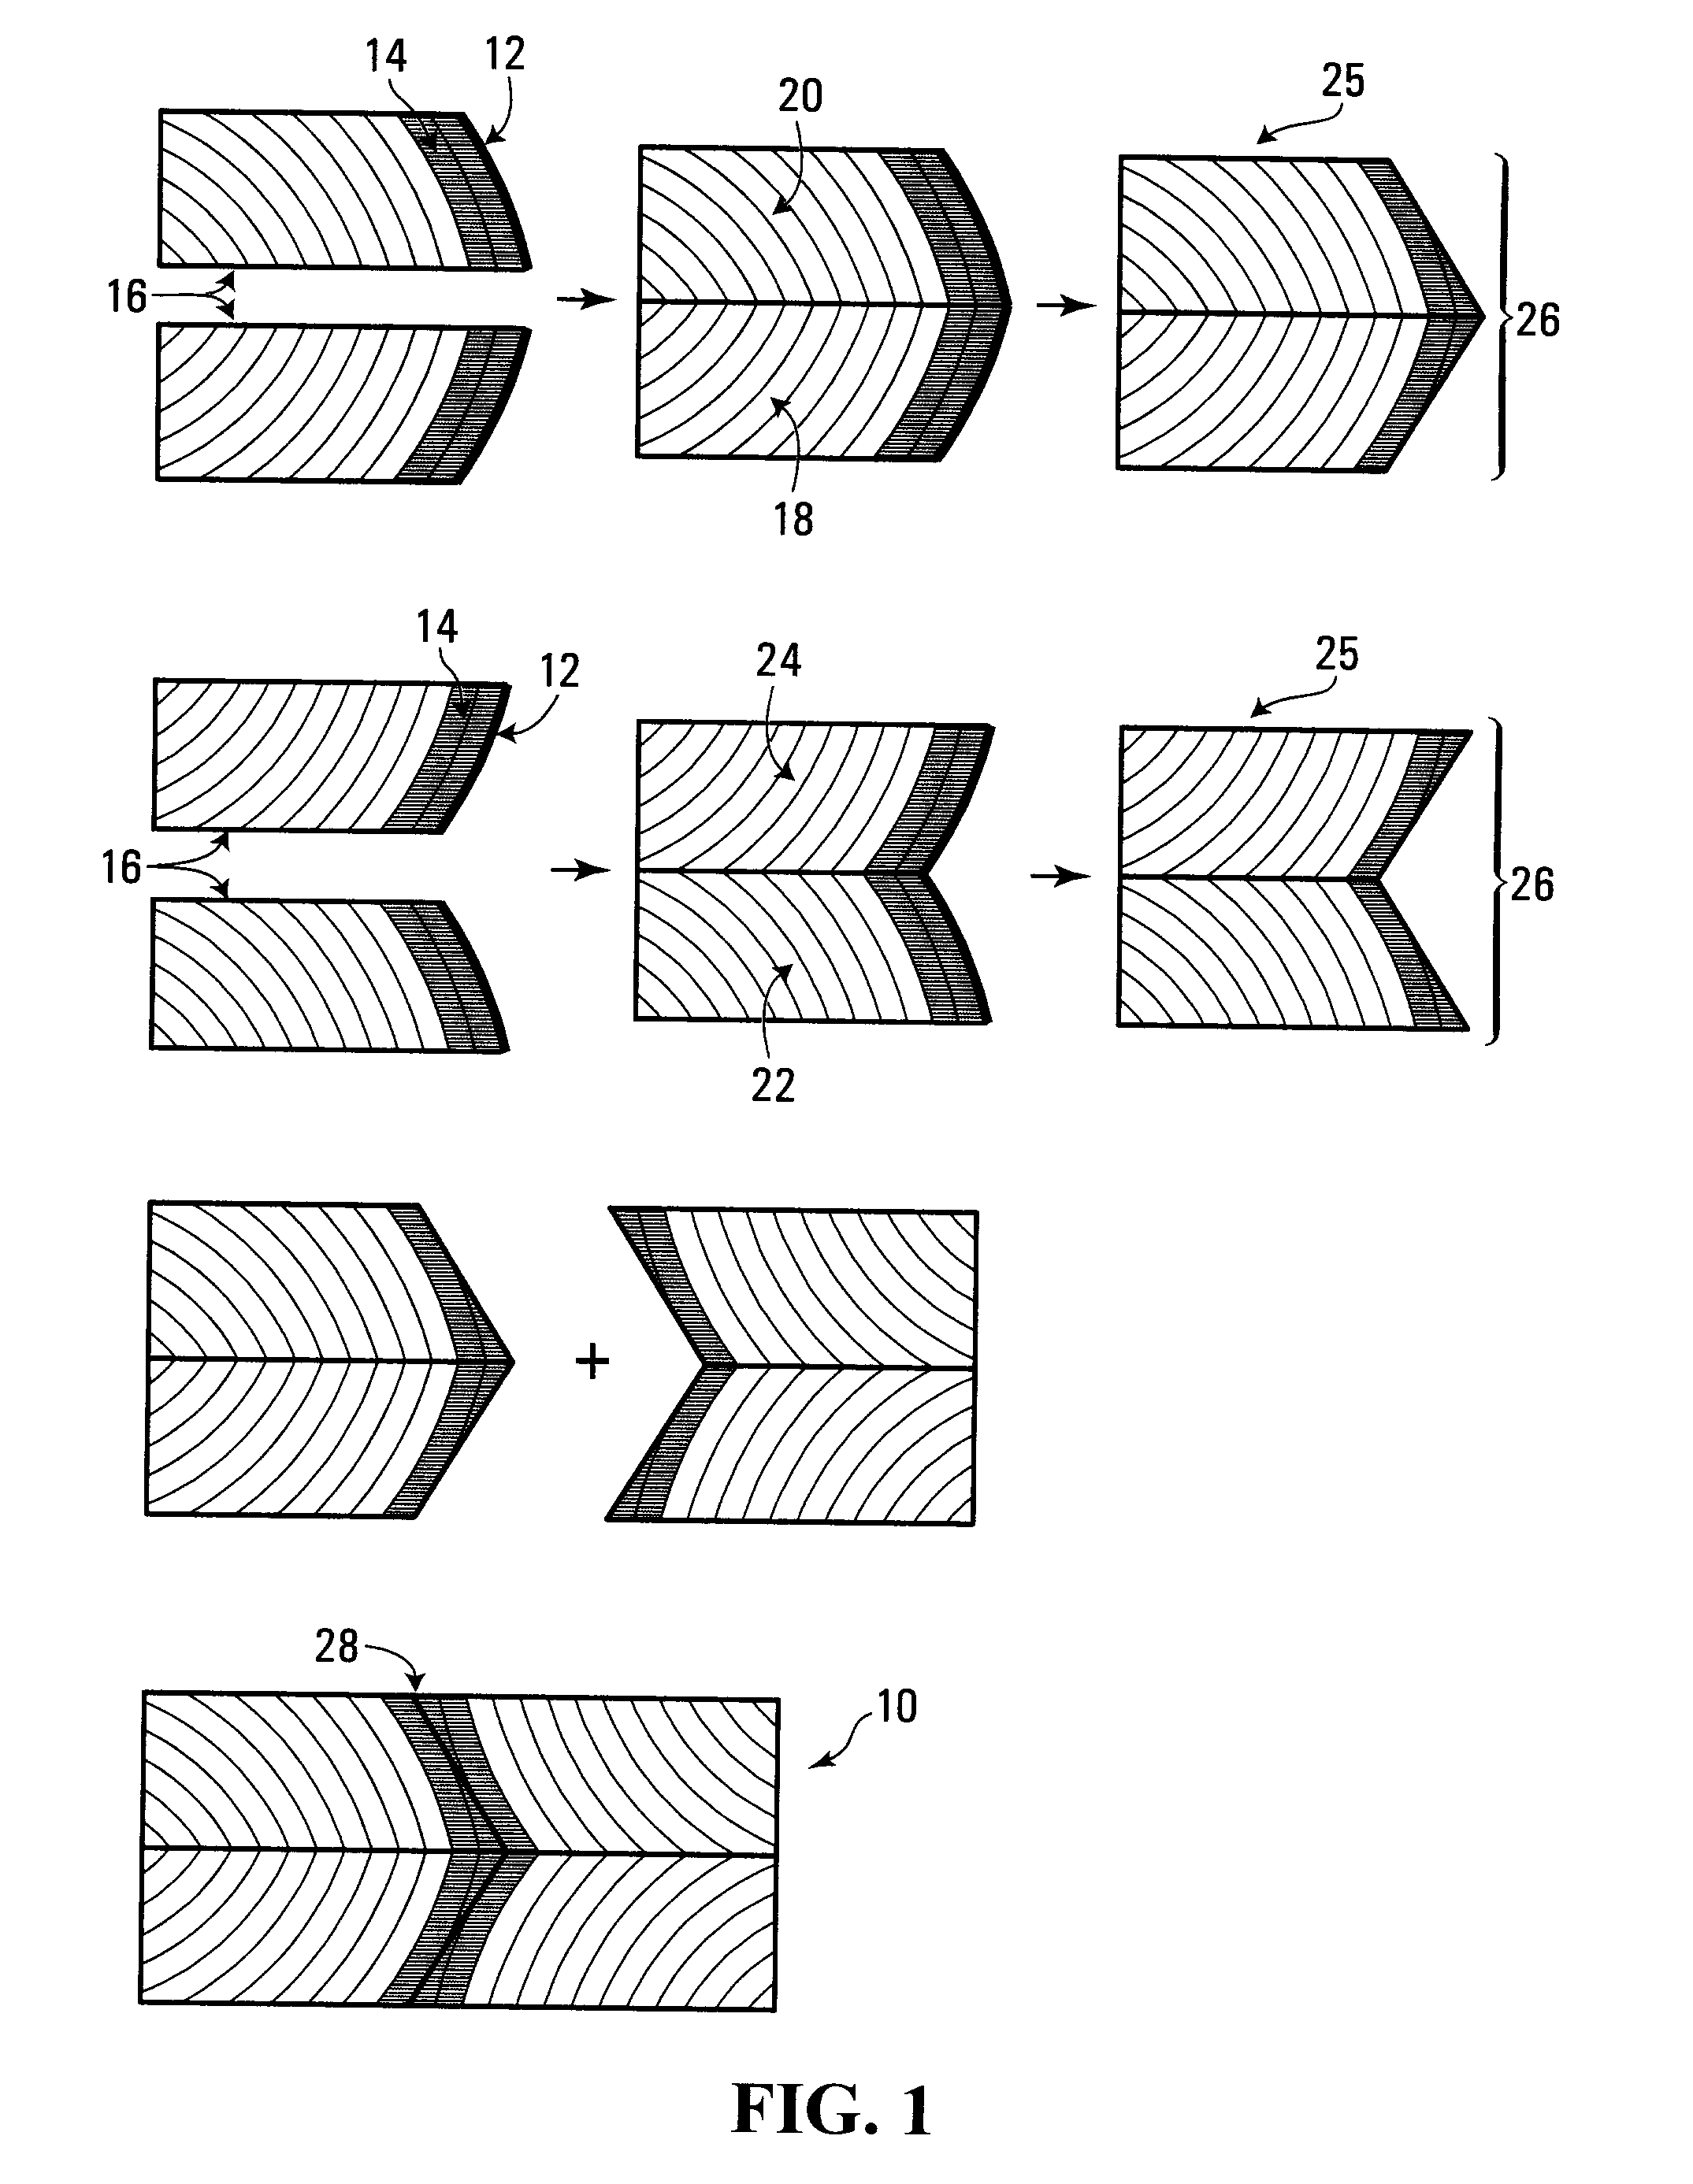 Composite wood product and method of manufacture utilizing wood infected by bark beetles